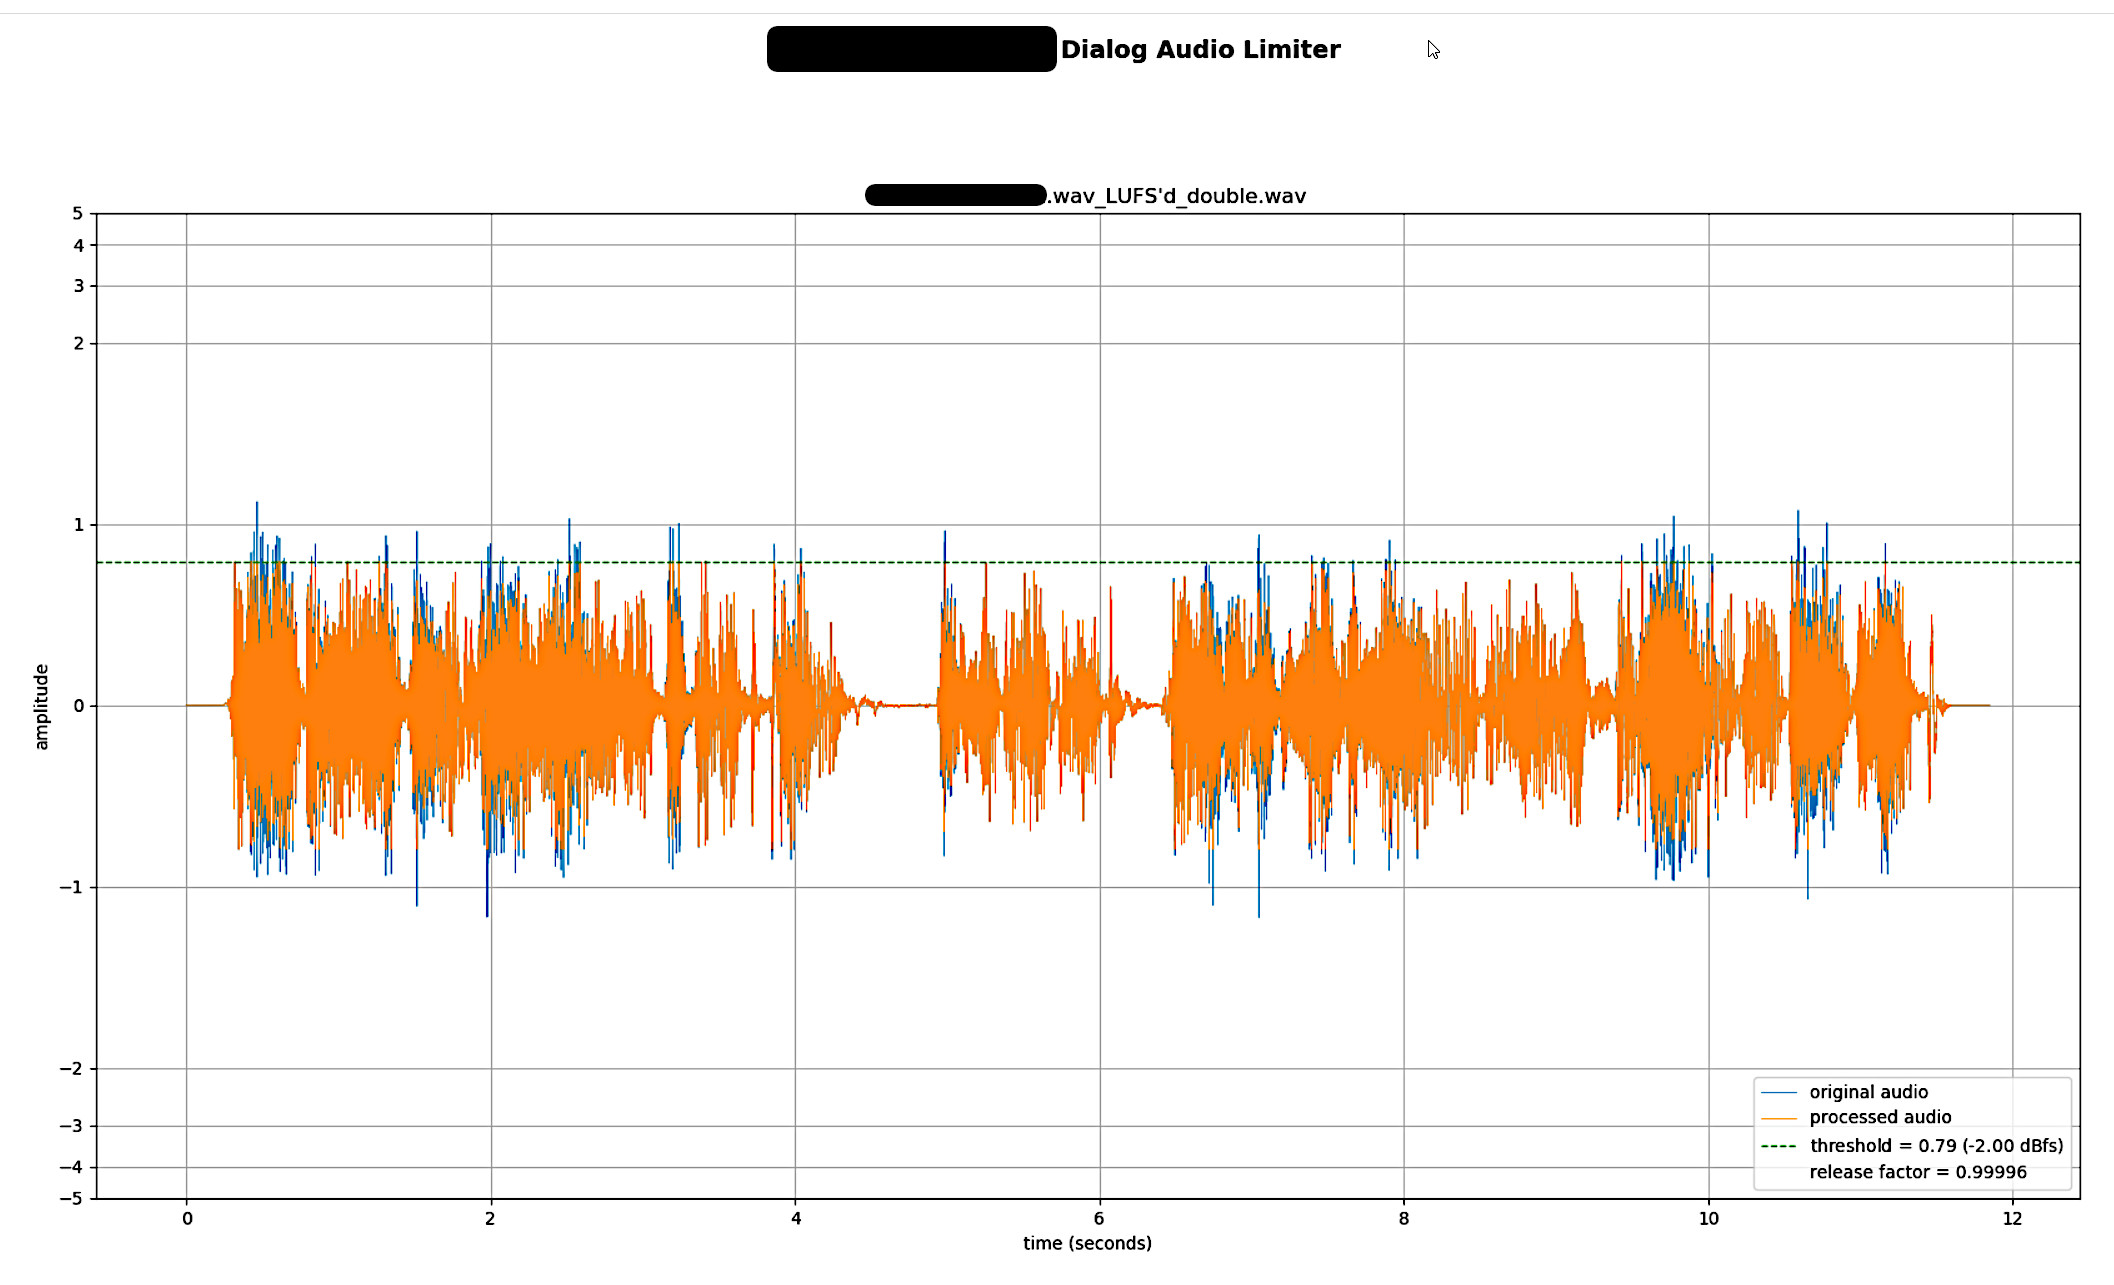 Image of audio DSP limiter affects on an audio waveform.